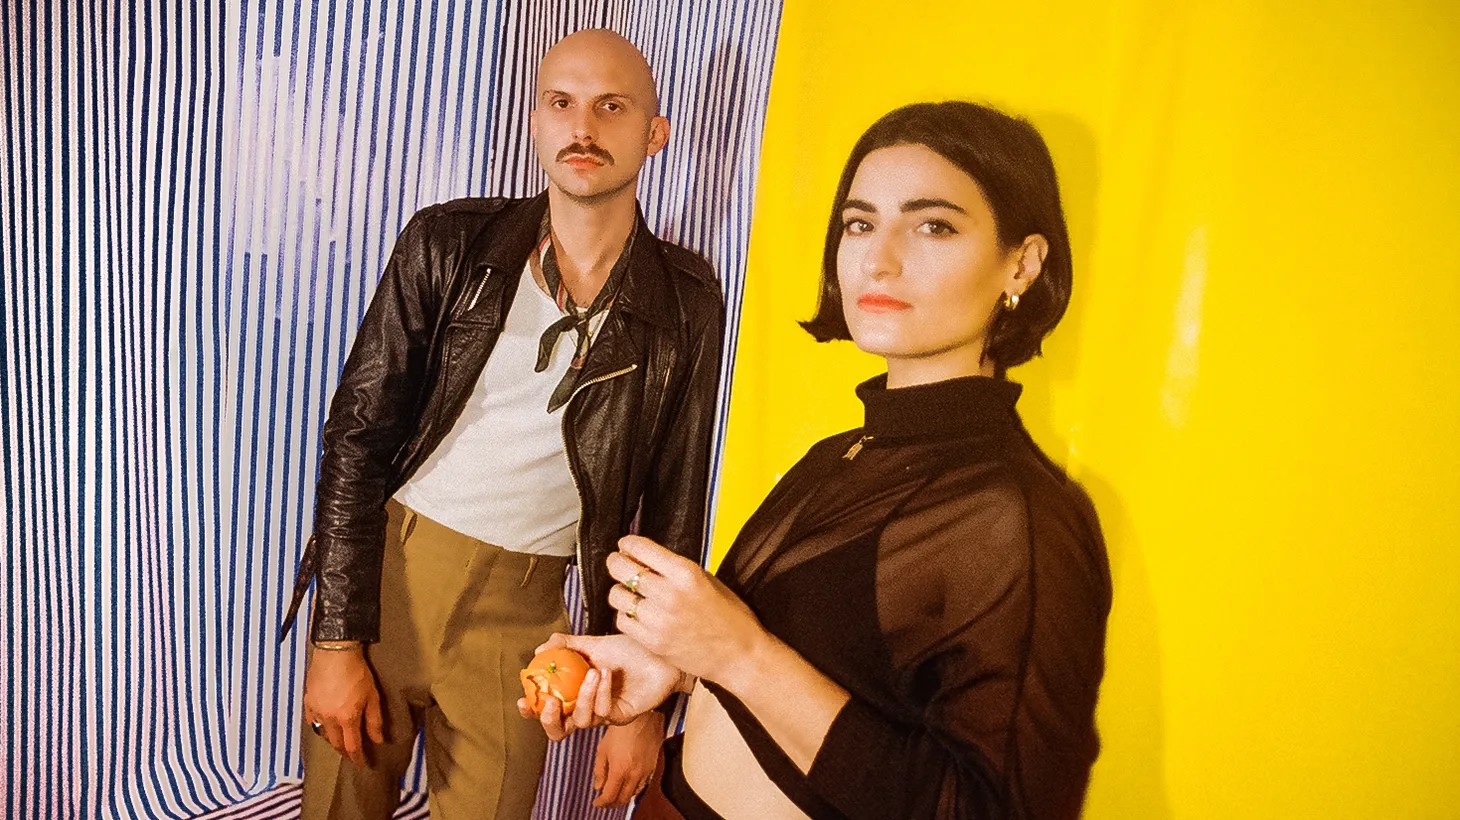 Atlanta-based duo Mattiel take in the Northern Georgian landscape to record their newly minted album “Georgia Gothic,” melding twangy guitars and Americana on their track “On The Run.”